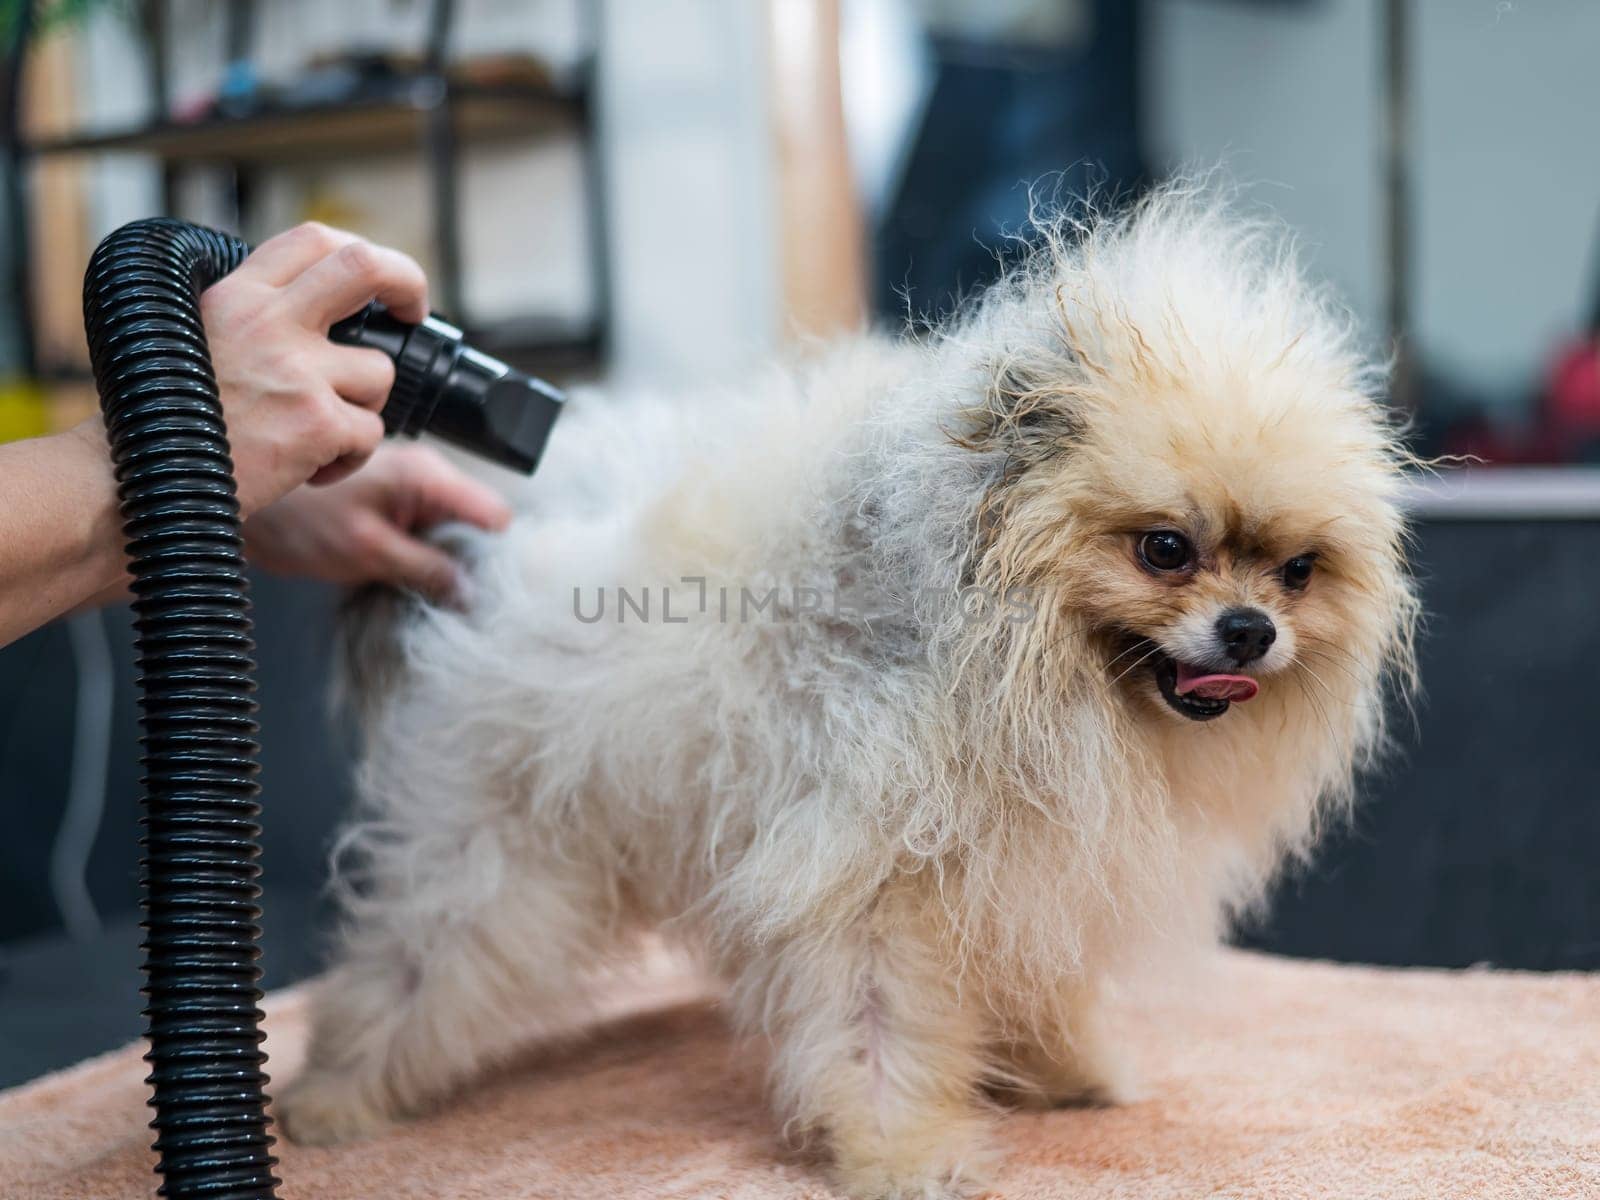 A woman dries a Pomeranian with a hair dryer after washing in a grooming salon. by mrwed54